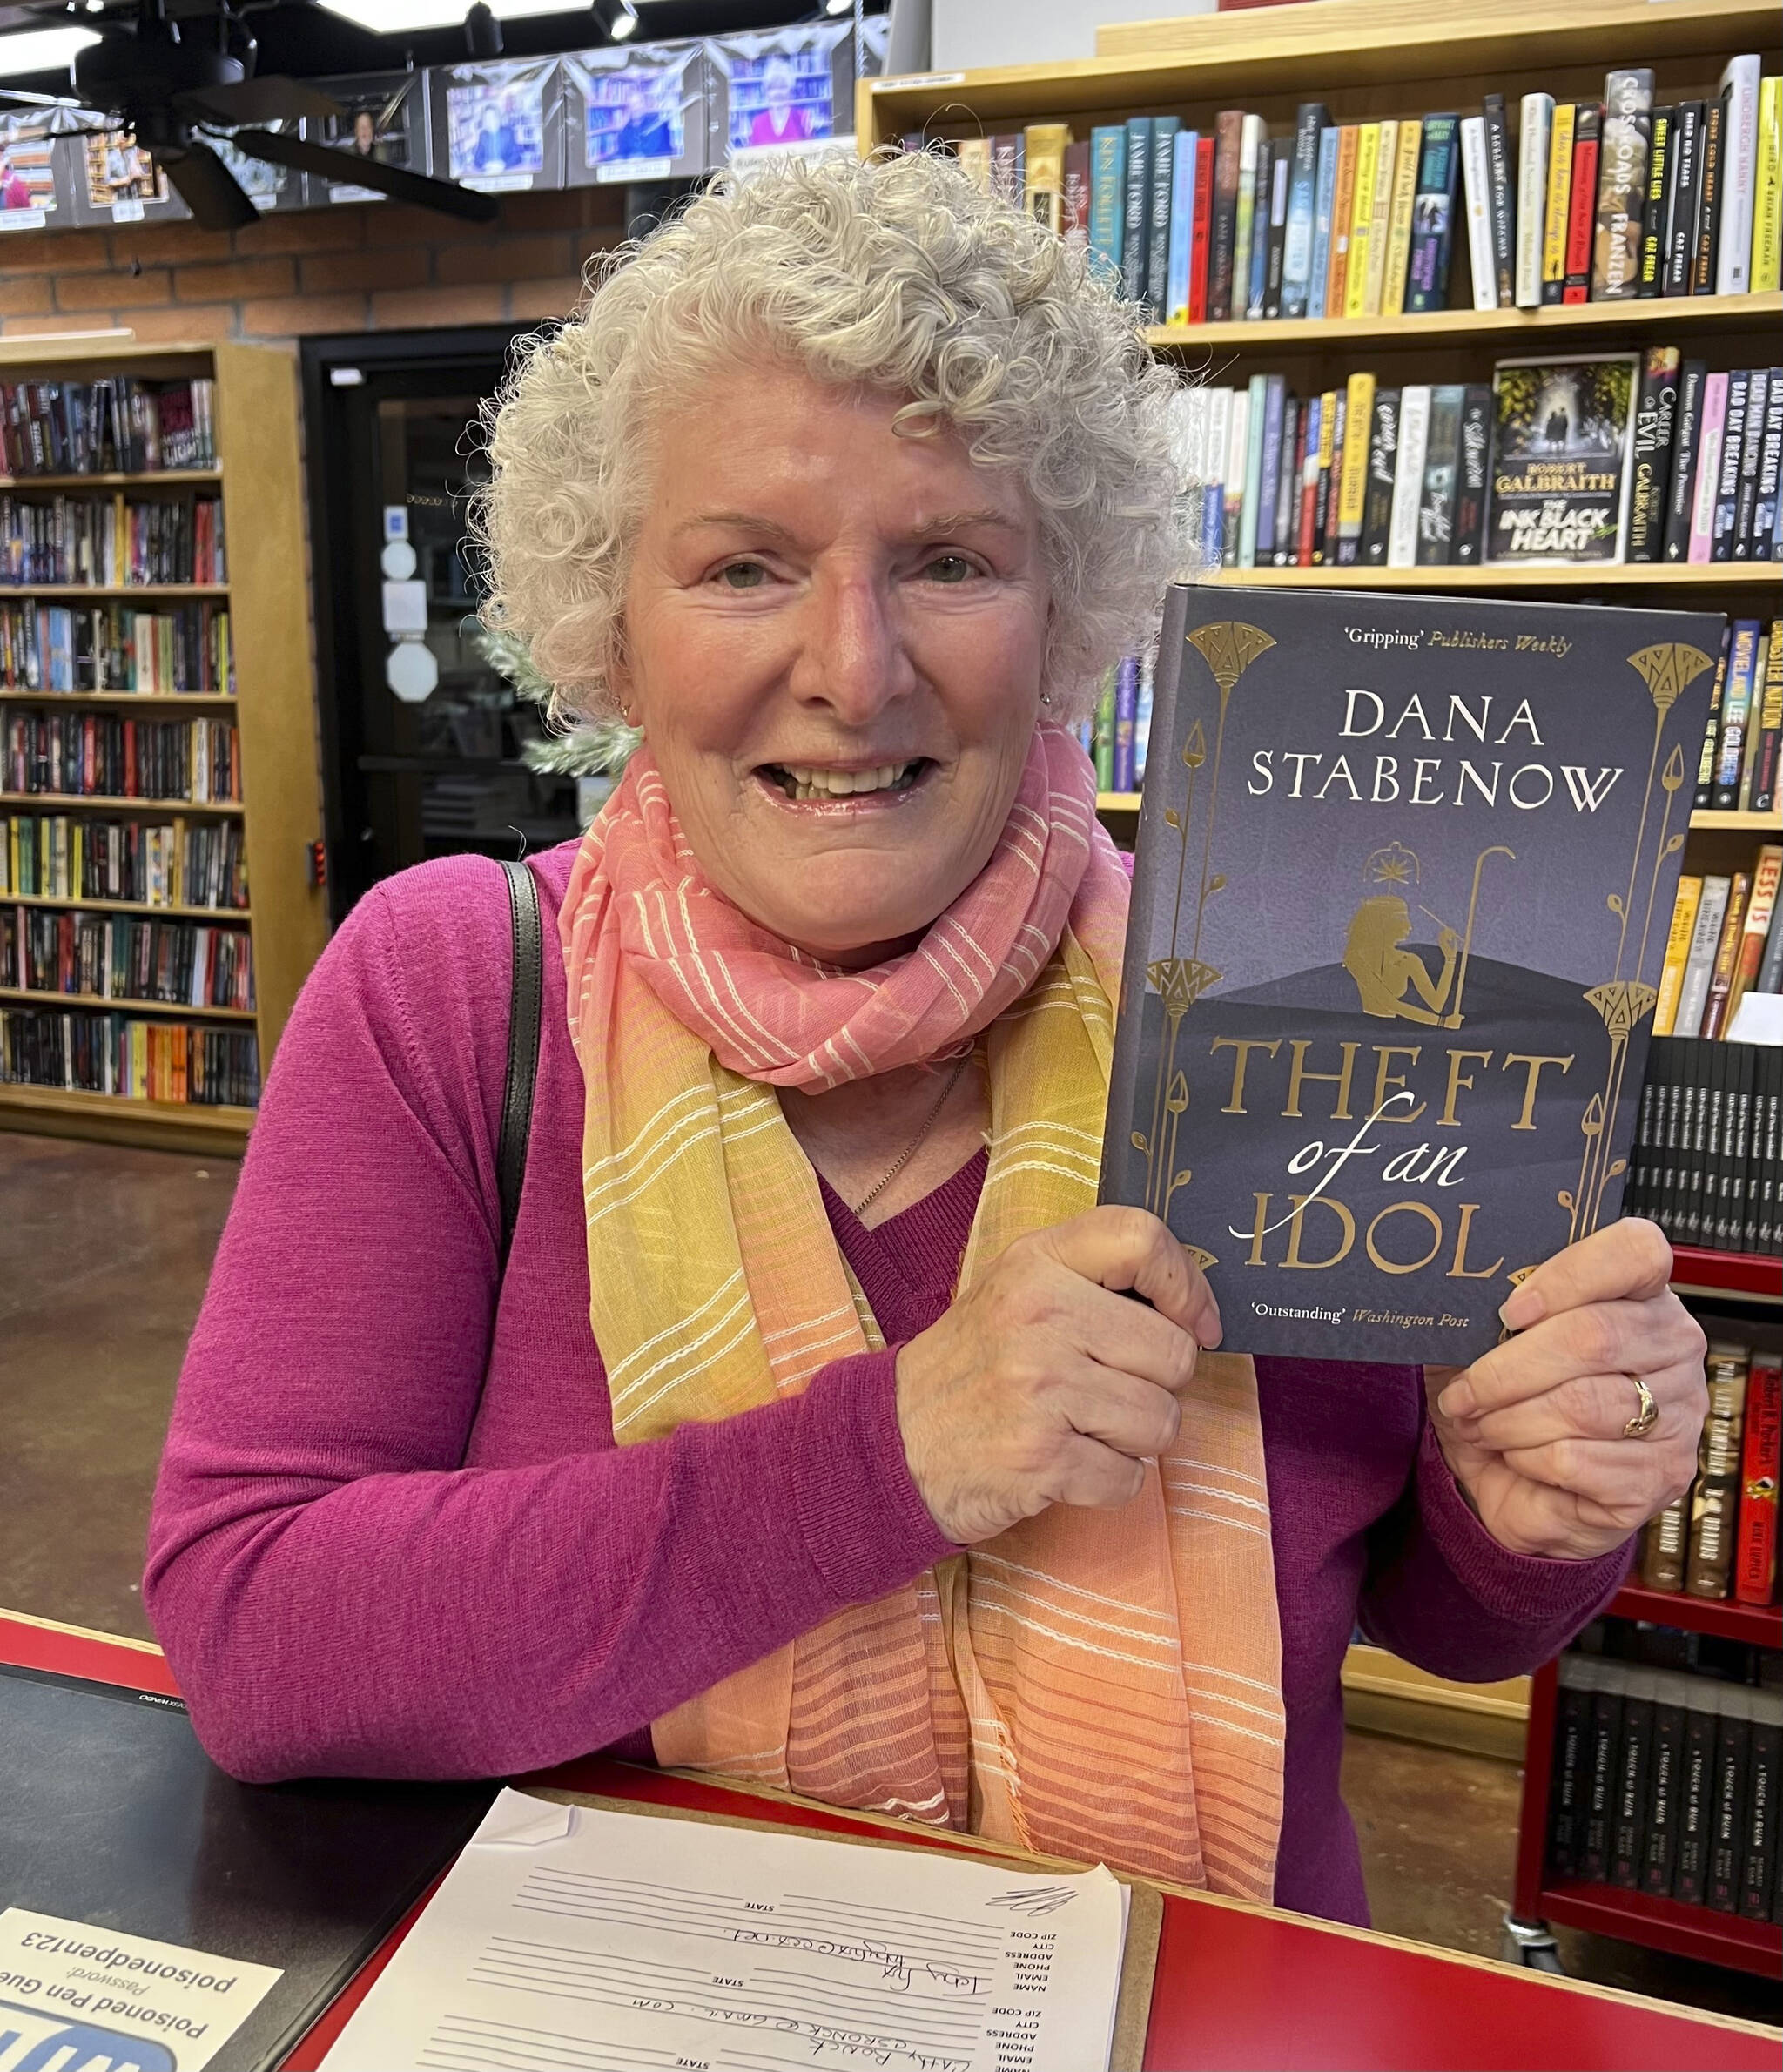 Dana Stabenow at a recent booksigning at the Poisoned Pen Bookstore in Scottsdale, Arizona. (Photo by John Charles)